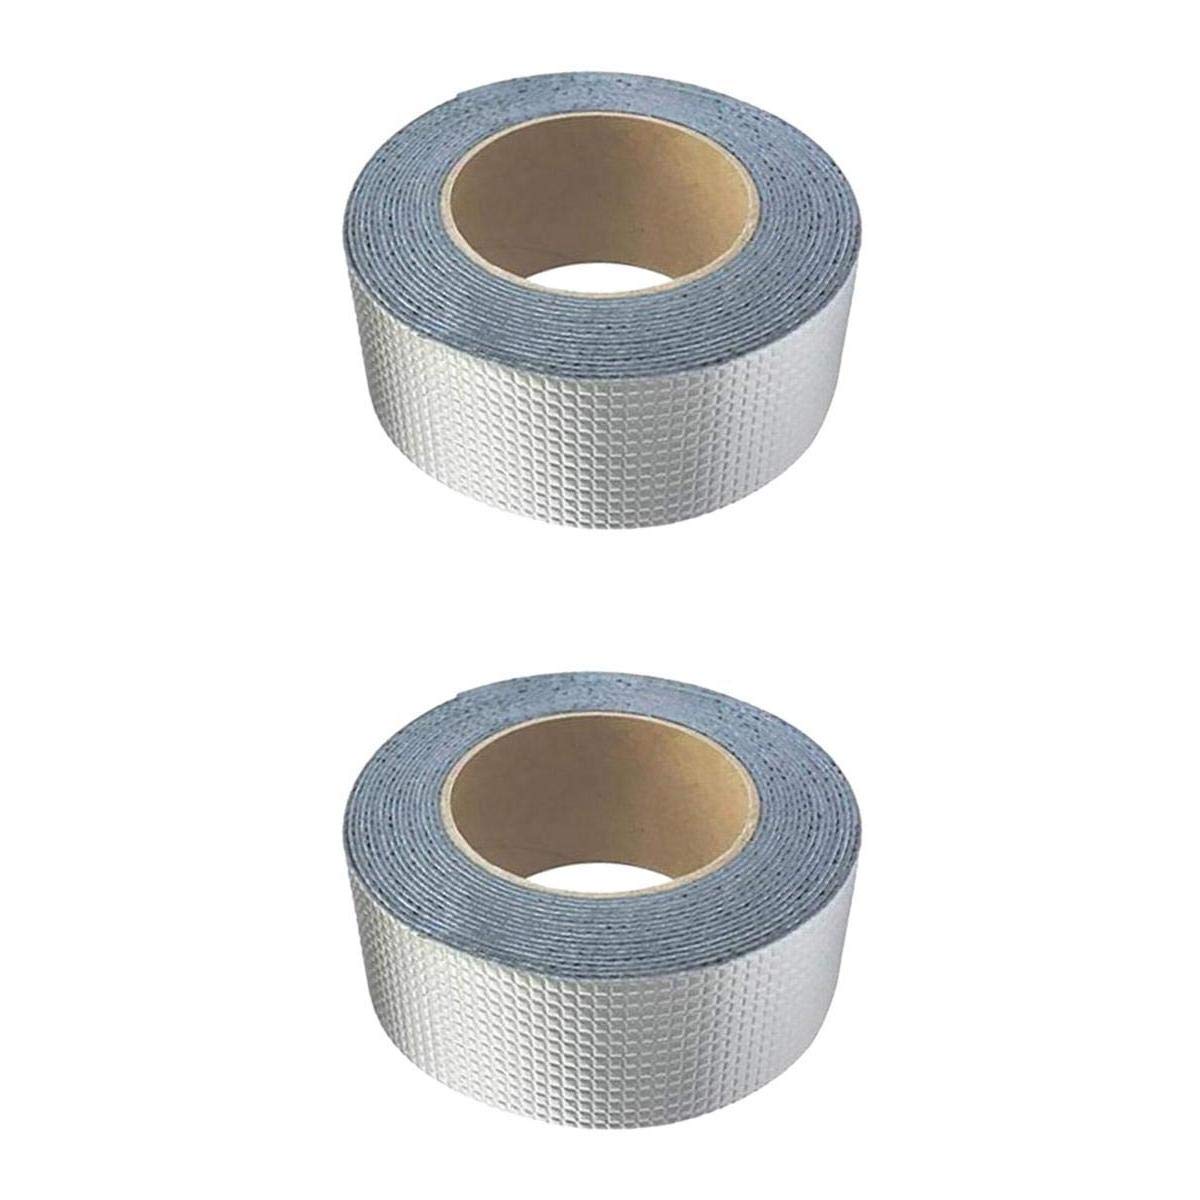 Almencla 2PCS Aluminum Foil Butyl Rubber Waterproof Tape for Window, Boat Sealing, Glass and Roof Patching, etc.